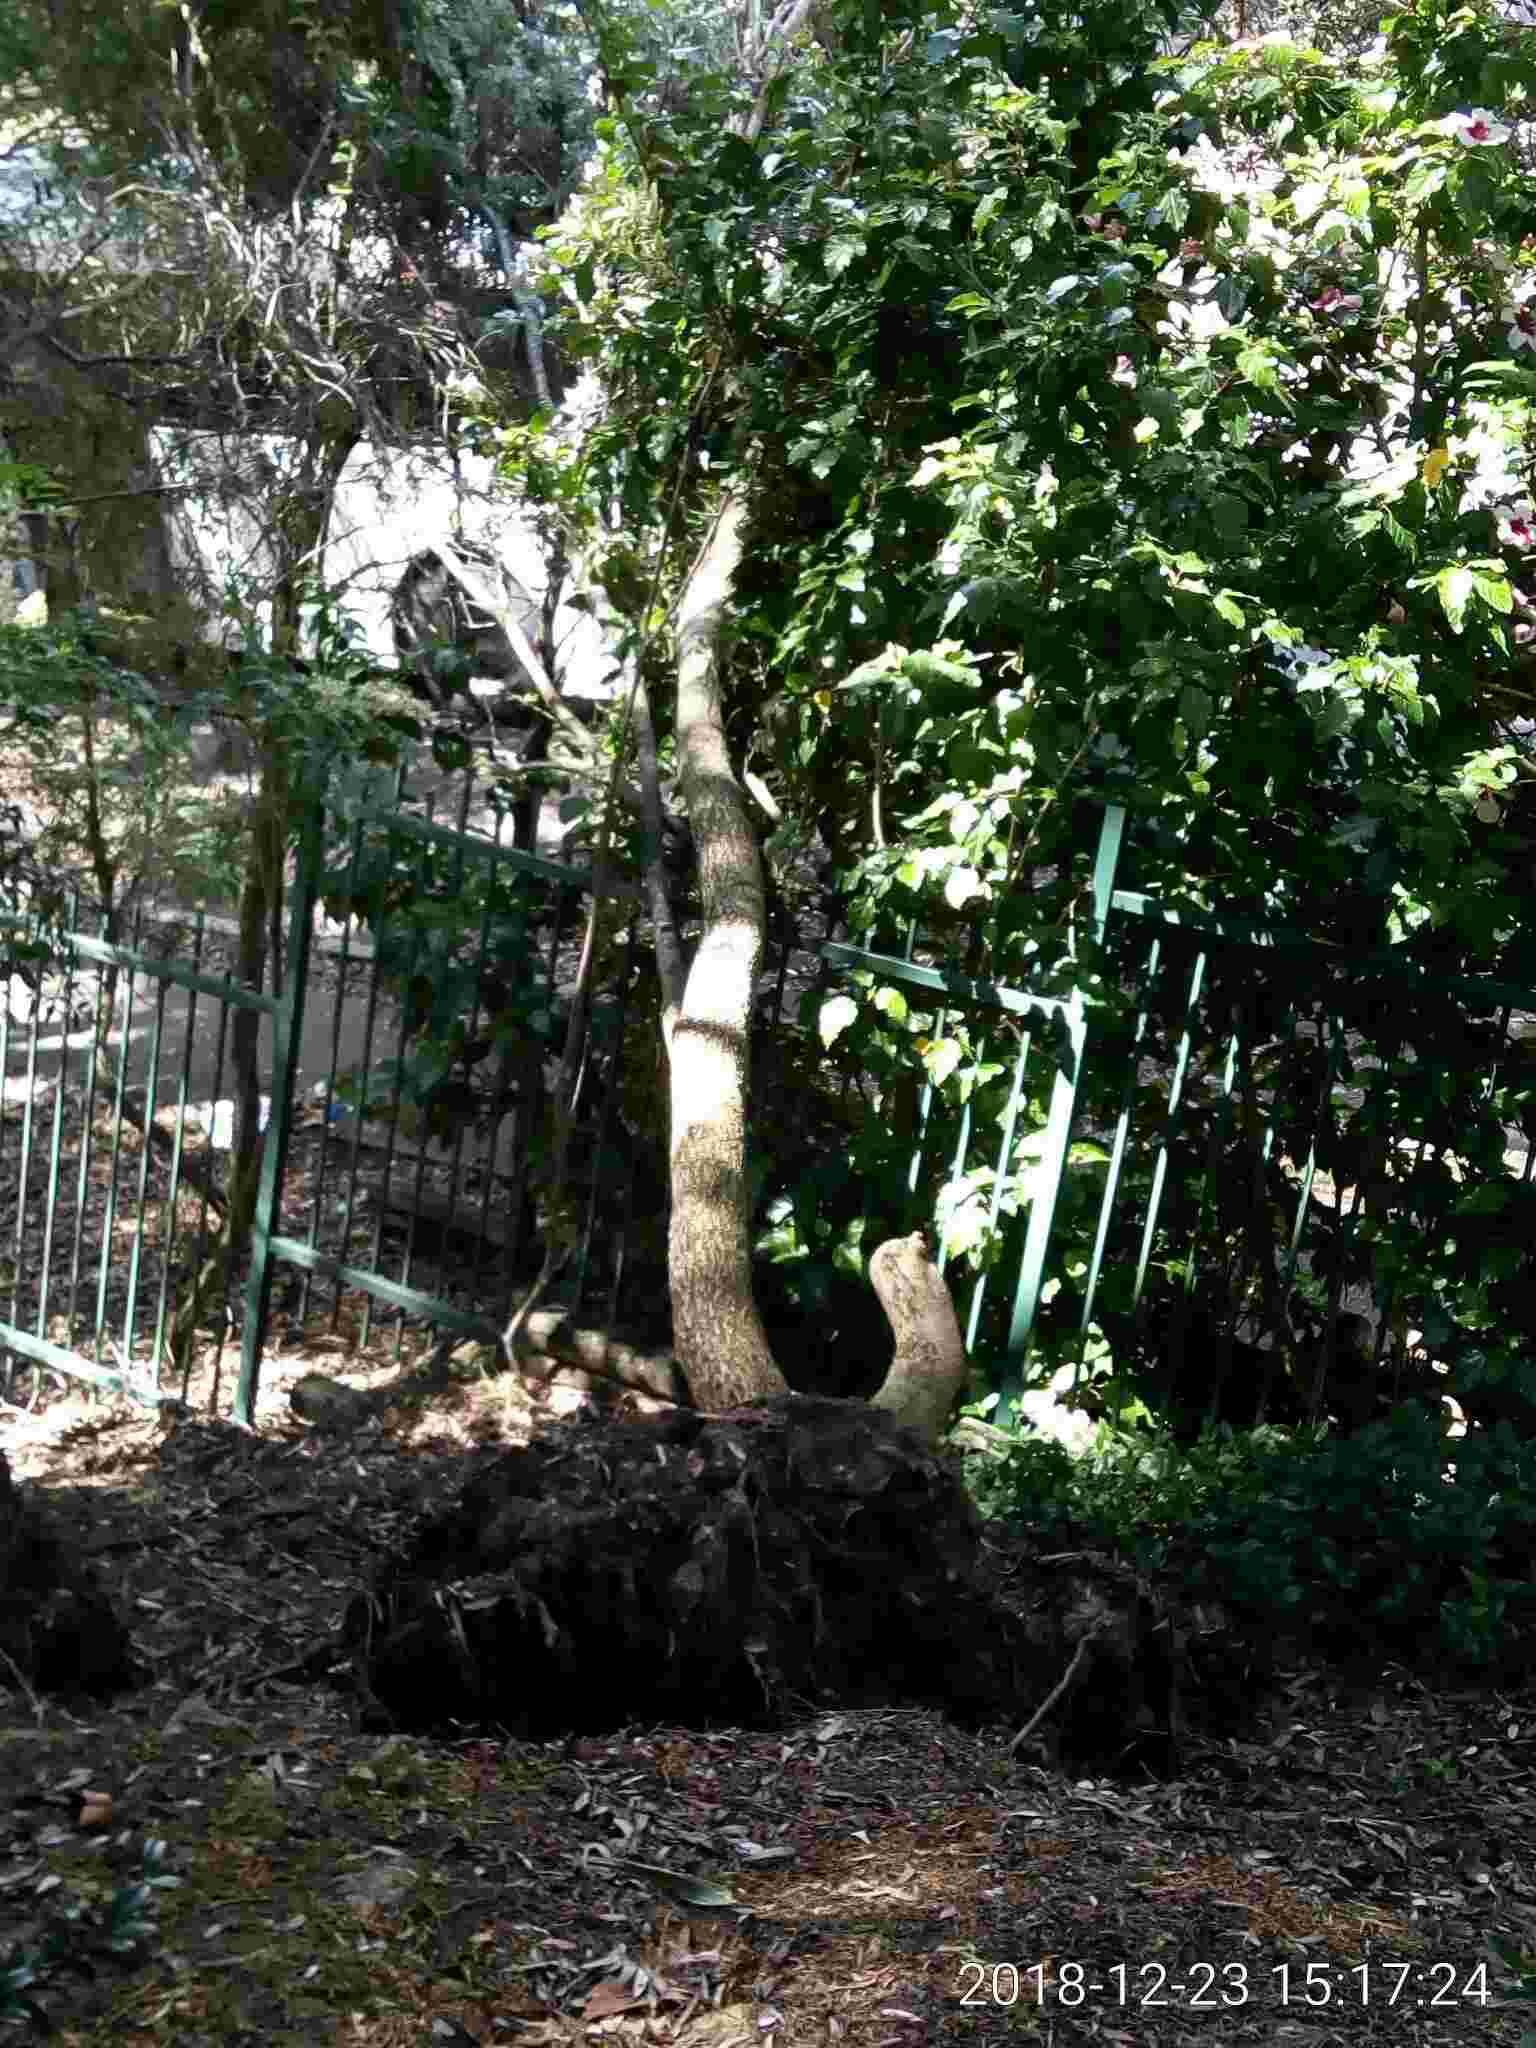 SP52948-neglected-damage-to-fence-due-to-uprooted-tree-that-might-cause-damage-to-property-outside-complex-photo-8-23Dec2018.jpg